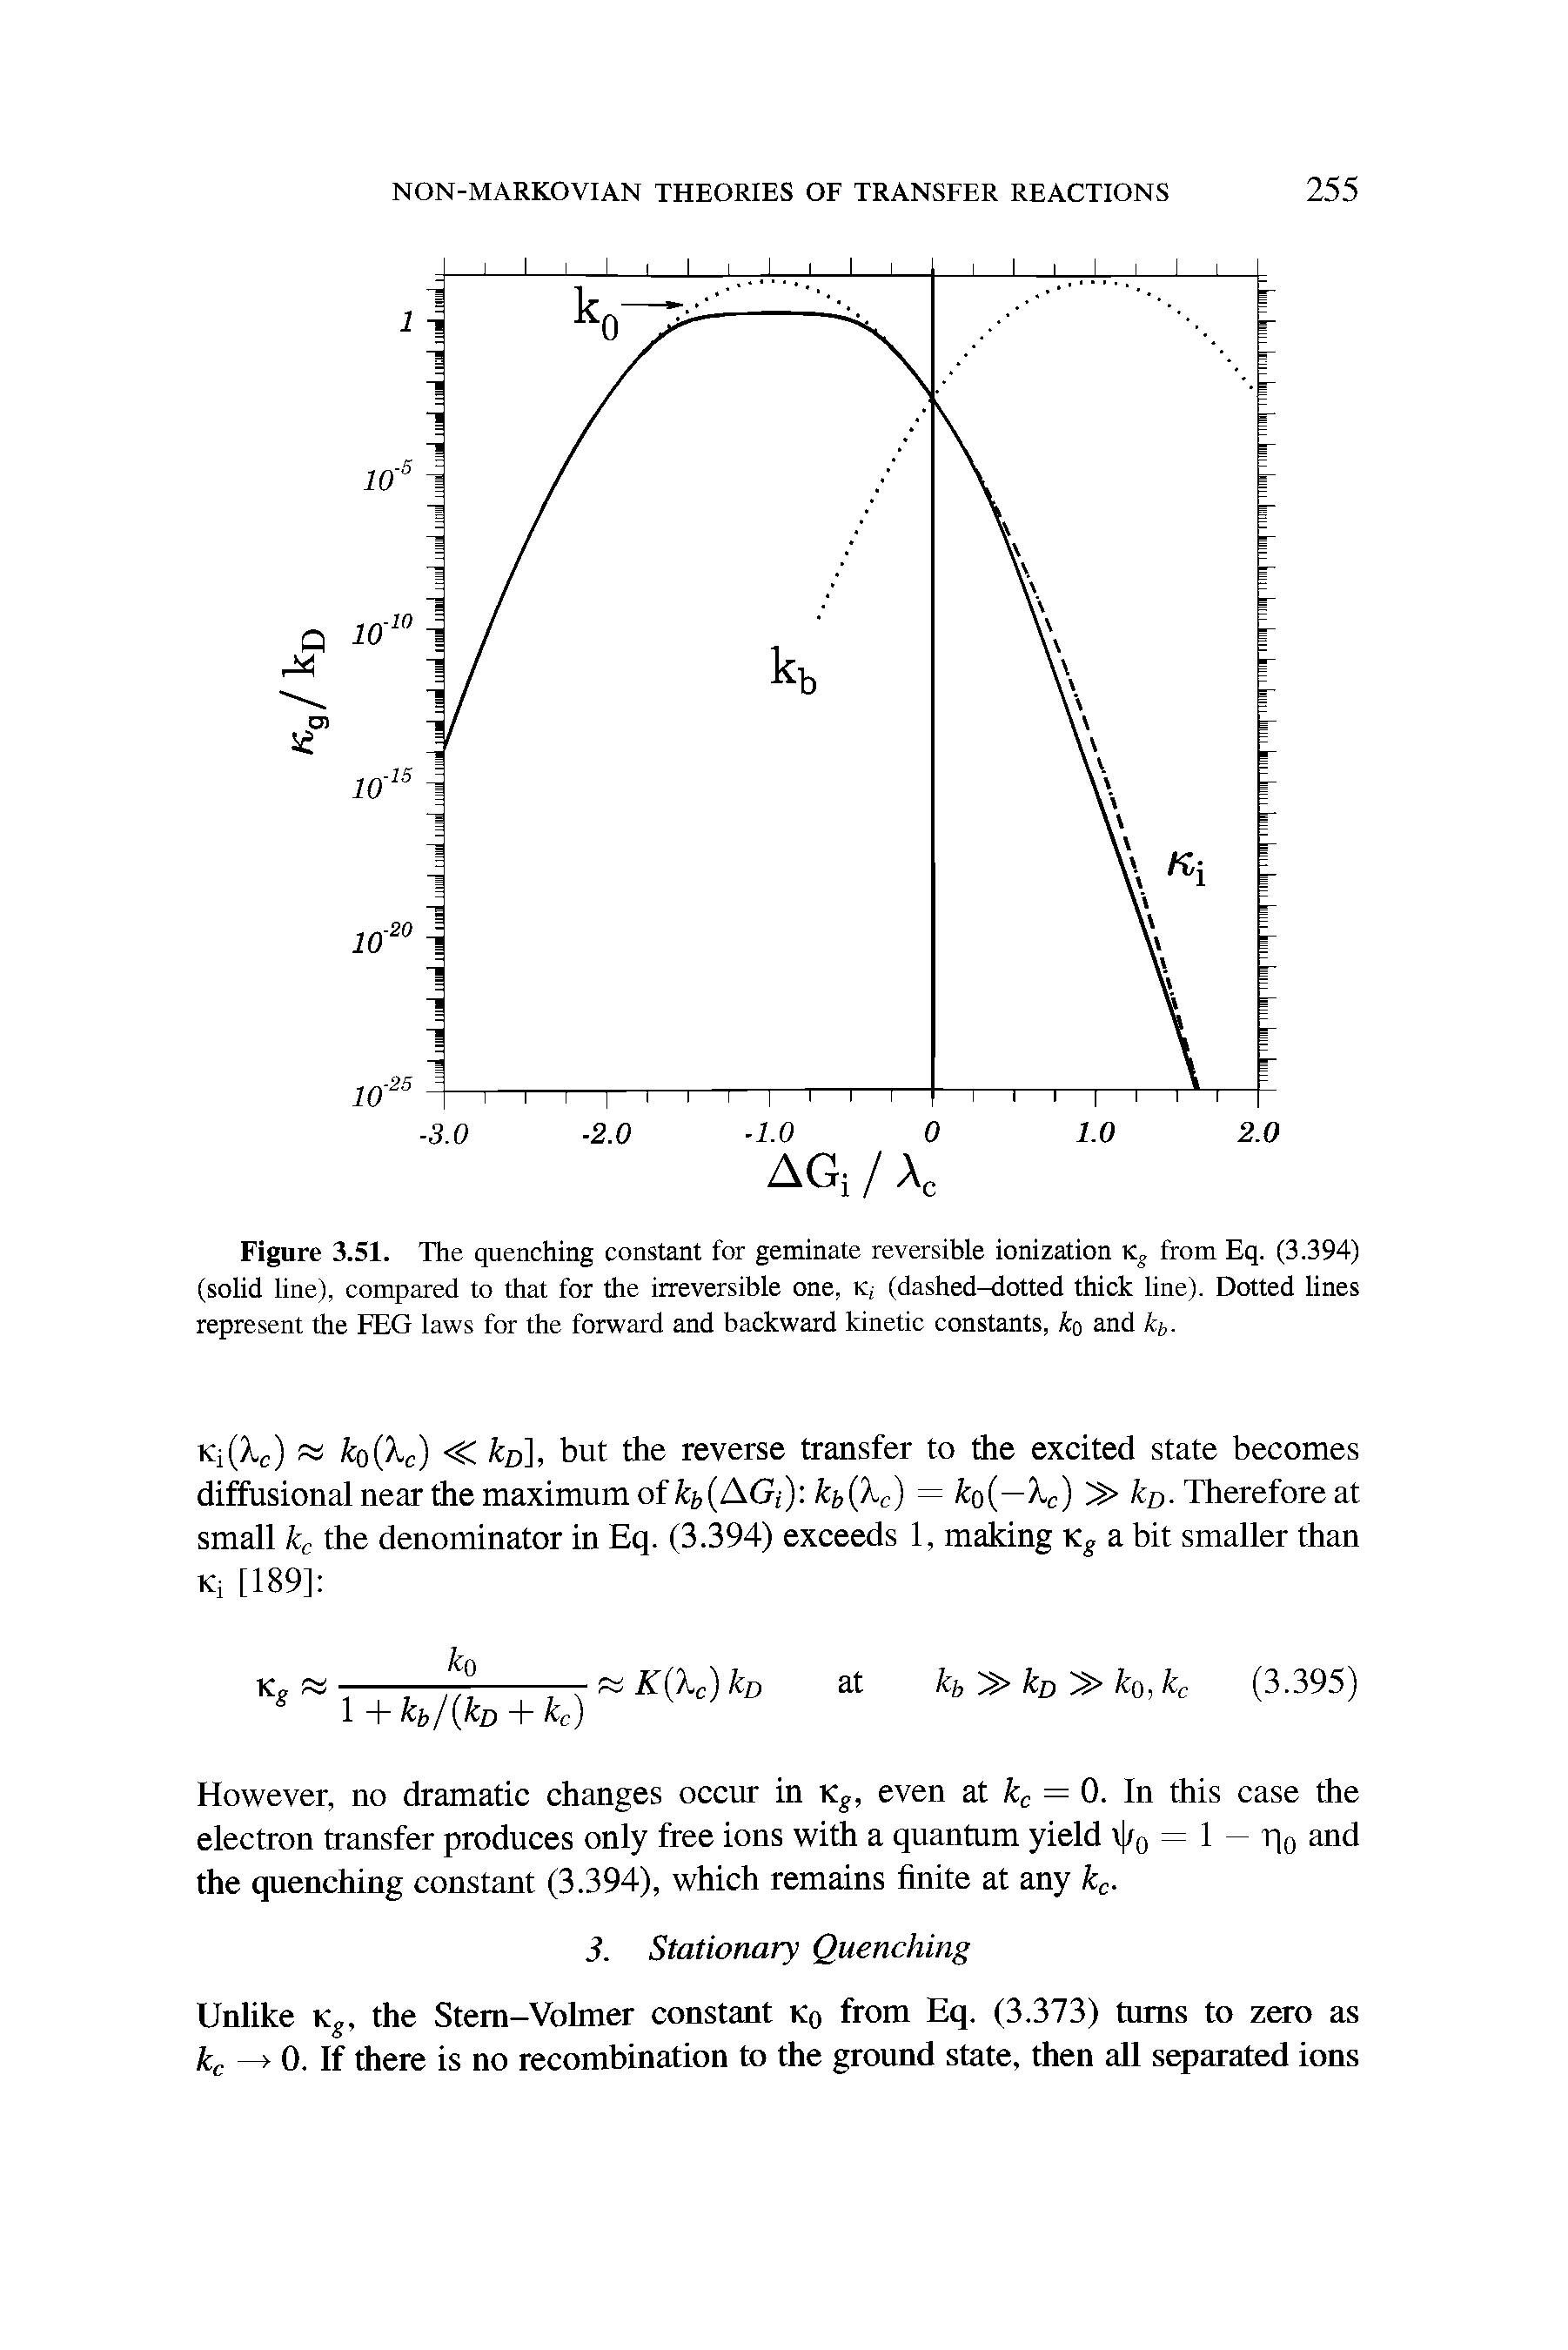 Figure 3.51. The quenching constant for geminate reversible ionization Ks from Eq. (3.394) (solid line), compared to that for the irreversible one, k (dashed-dotted thick line). Dotted lines represent the FEG laws for the forward and backward kinetic constants, ko and kb.